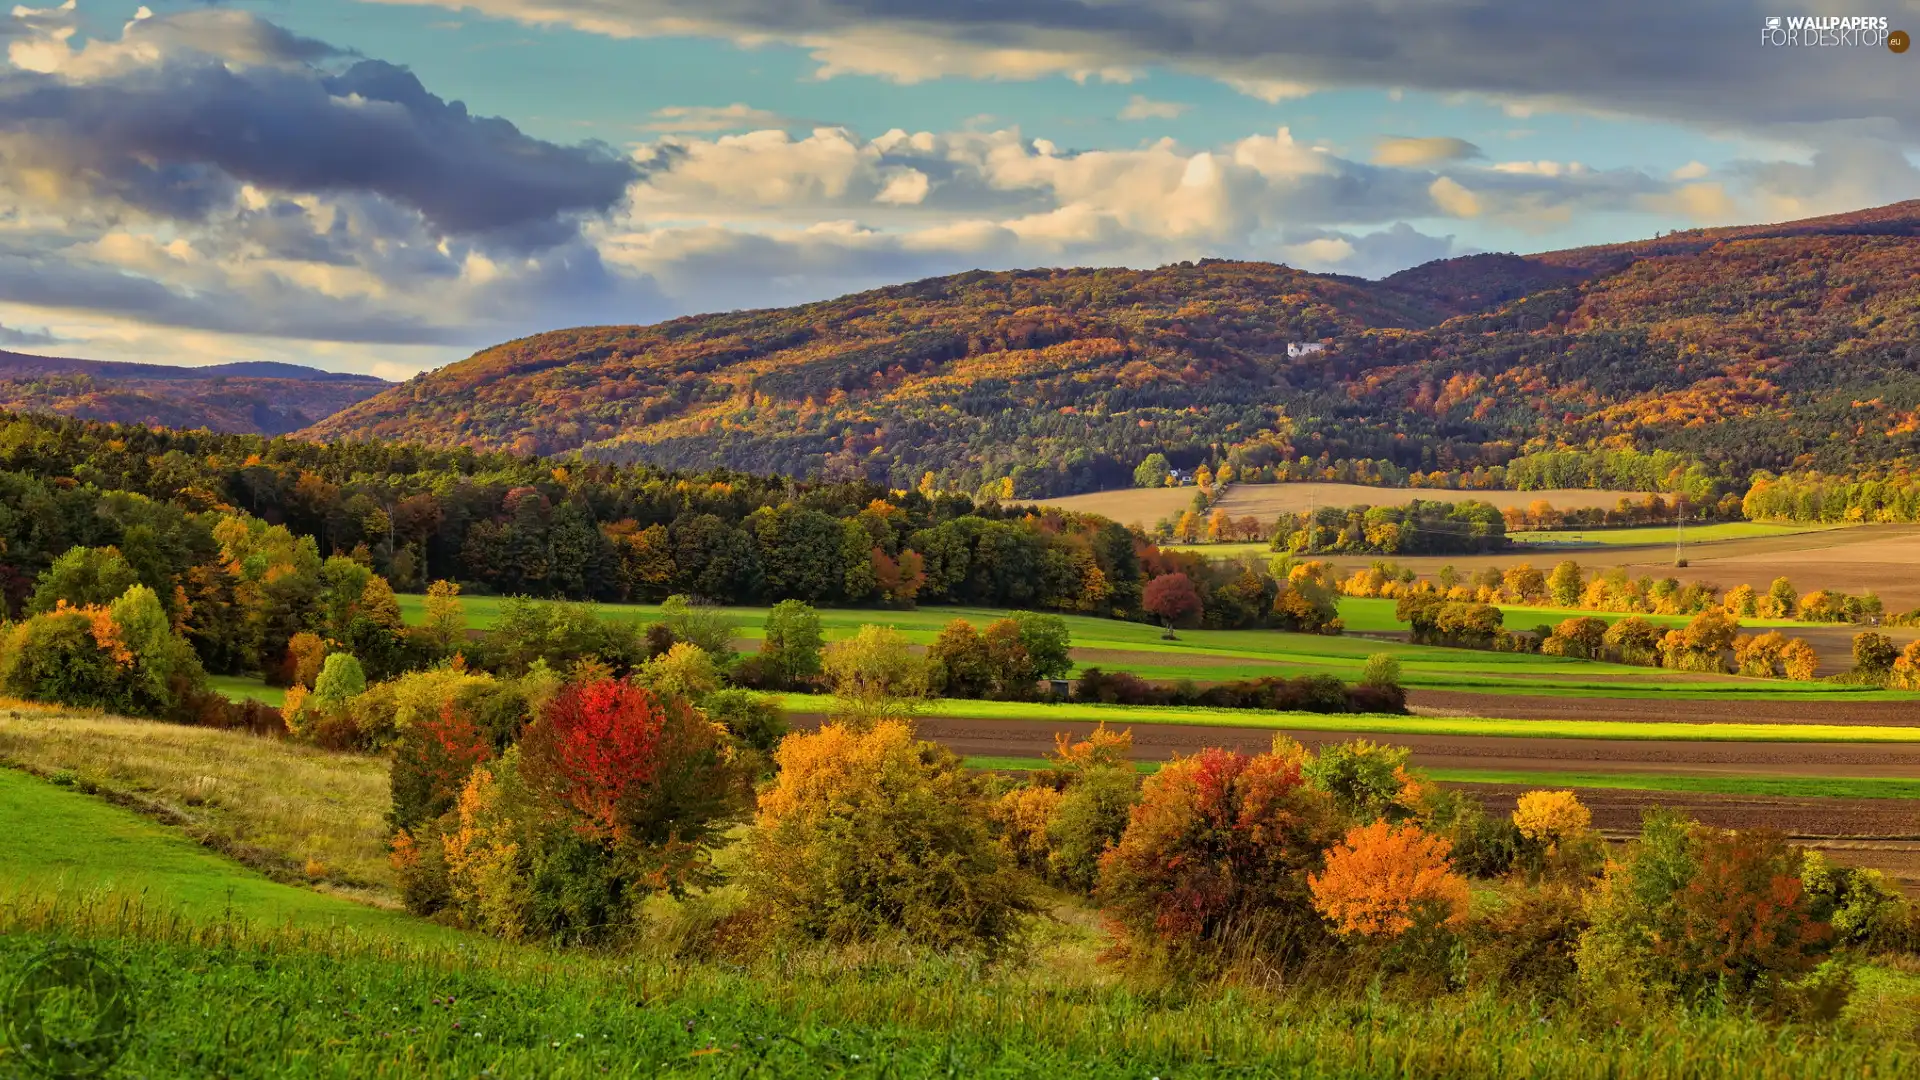 The Hills, autumn, trees, viewes, color, Mountains